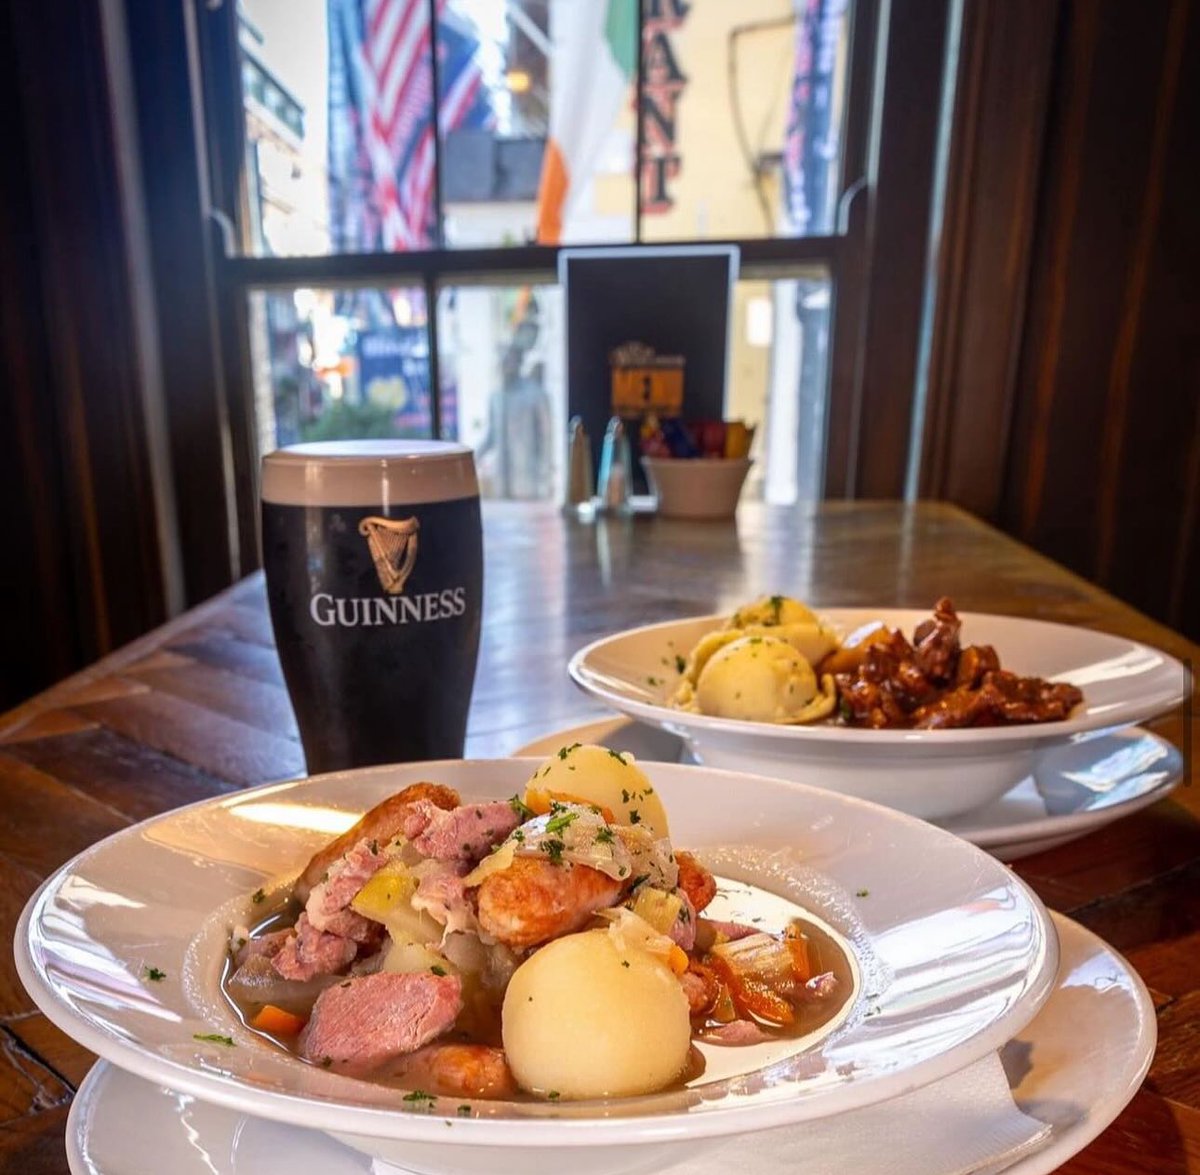 Treat yourself Taste of Tradition here in The Auld Dubliner this Weekend ☘️ #theaulddubliner #pub #templebar #dublin #dublinpubs